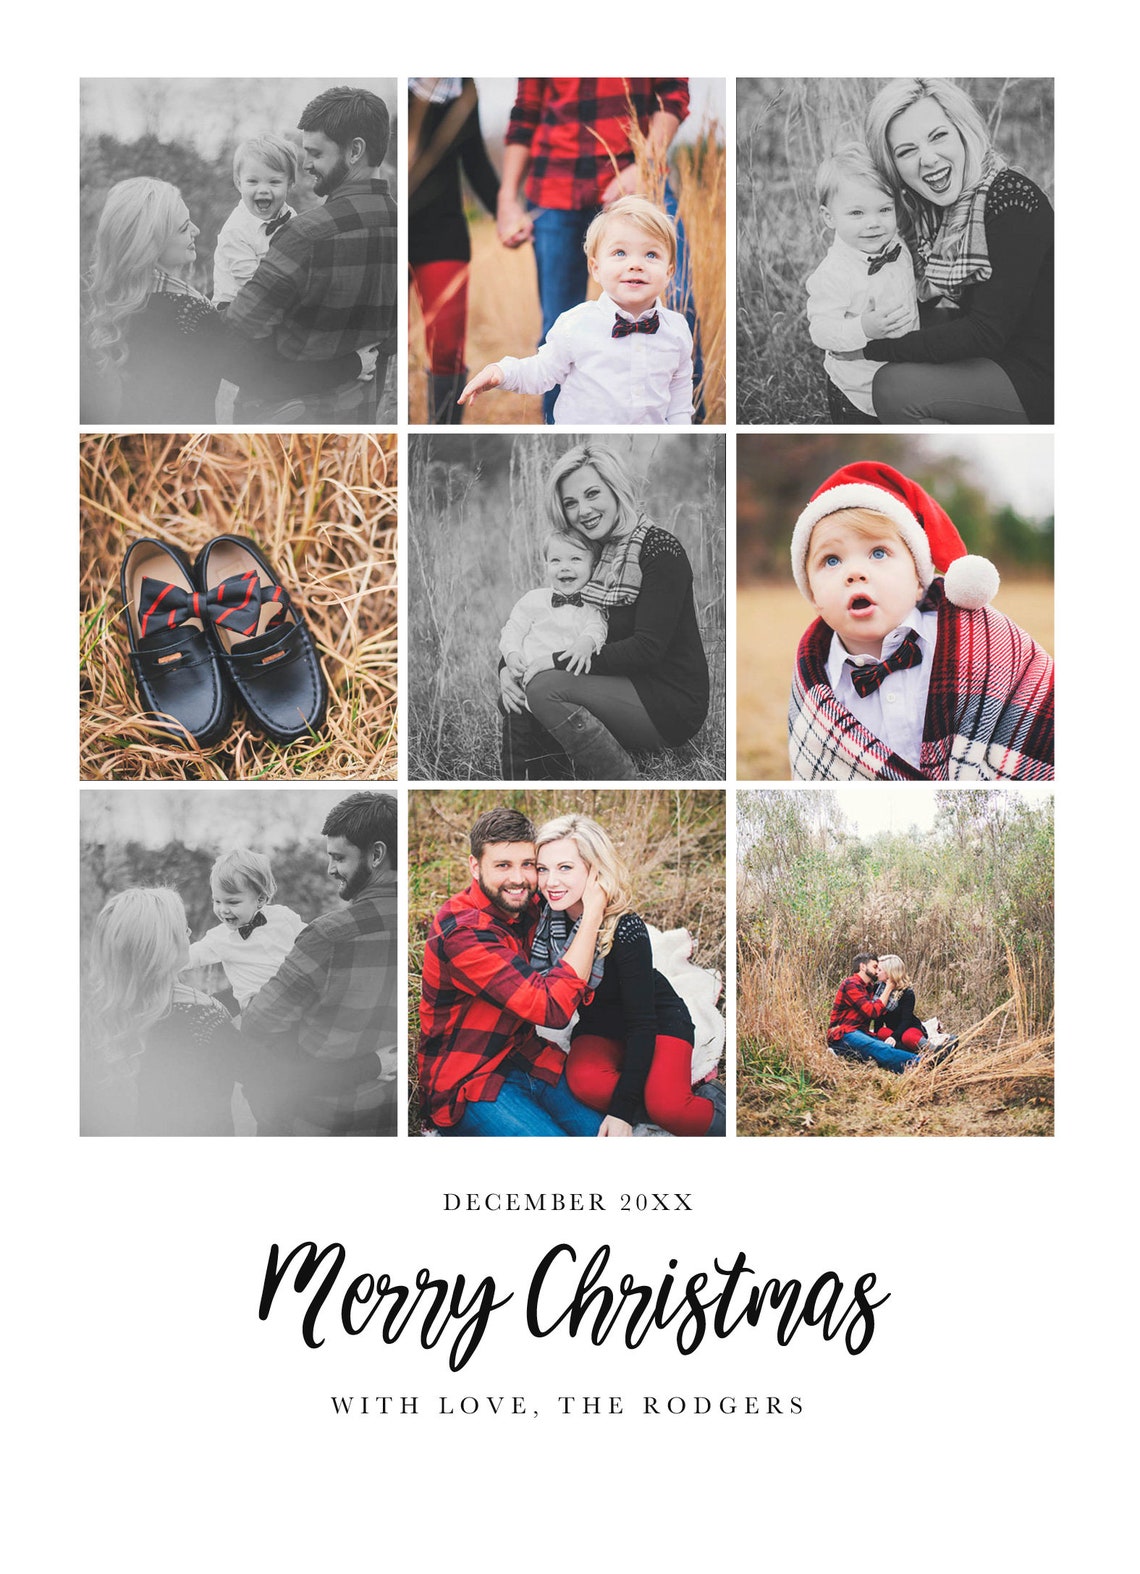 year-in-review-christmas-card-template-5x7-photo-card-free-etsy